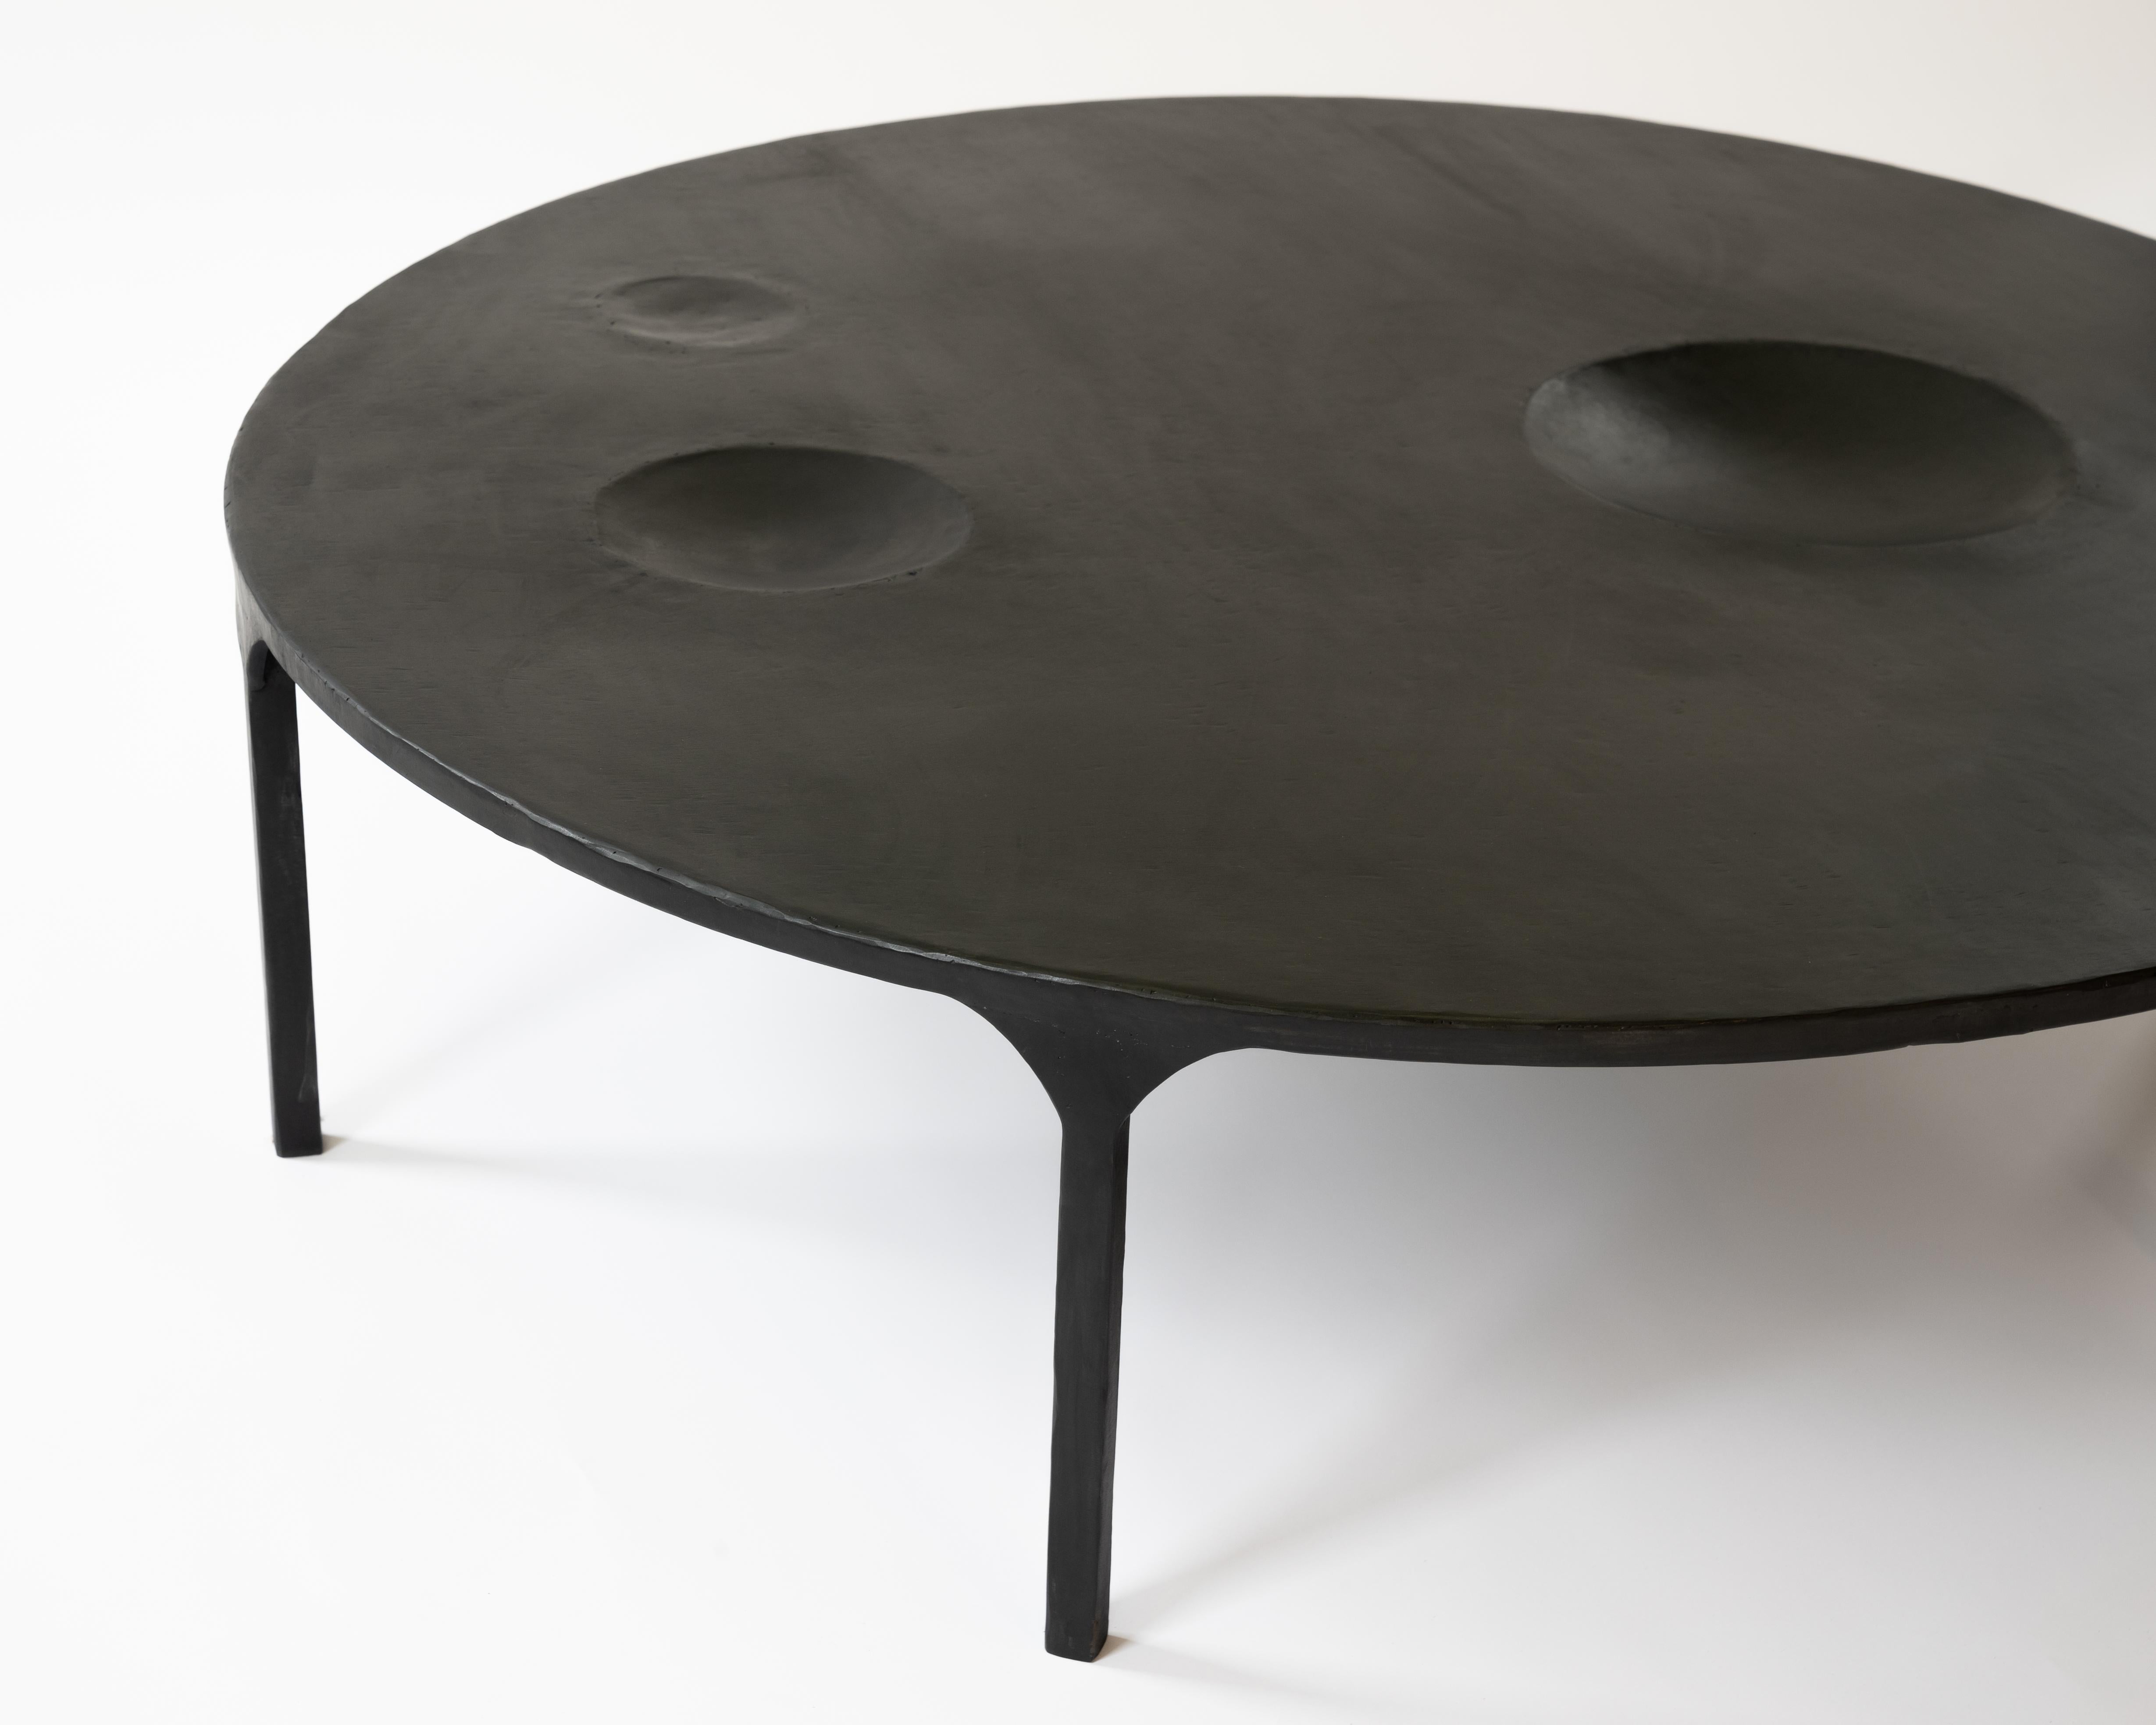 TABLE NO. 11 - Round
J.M. Szymanski
d. 2021

Handmade entirely out of blackened and waxed steel, this table features geometric
voids within the table itself. Also available with food-safe, ceramic, bowl inserts. Each
one is made specifically